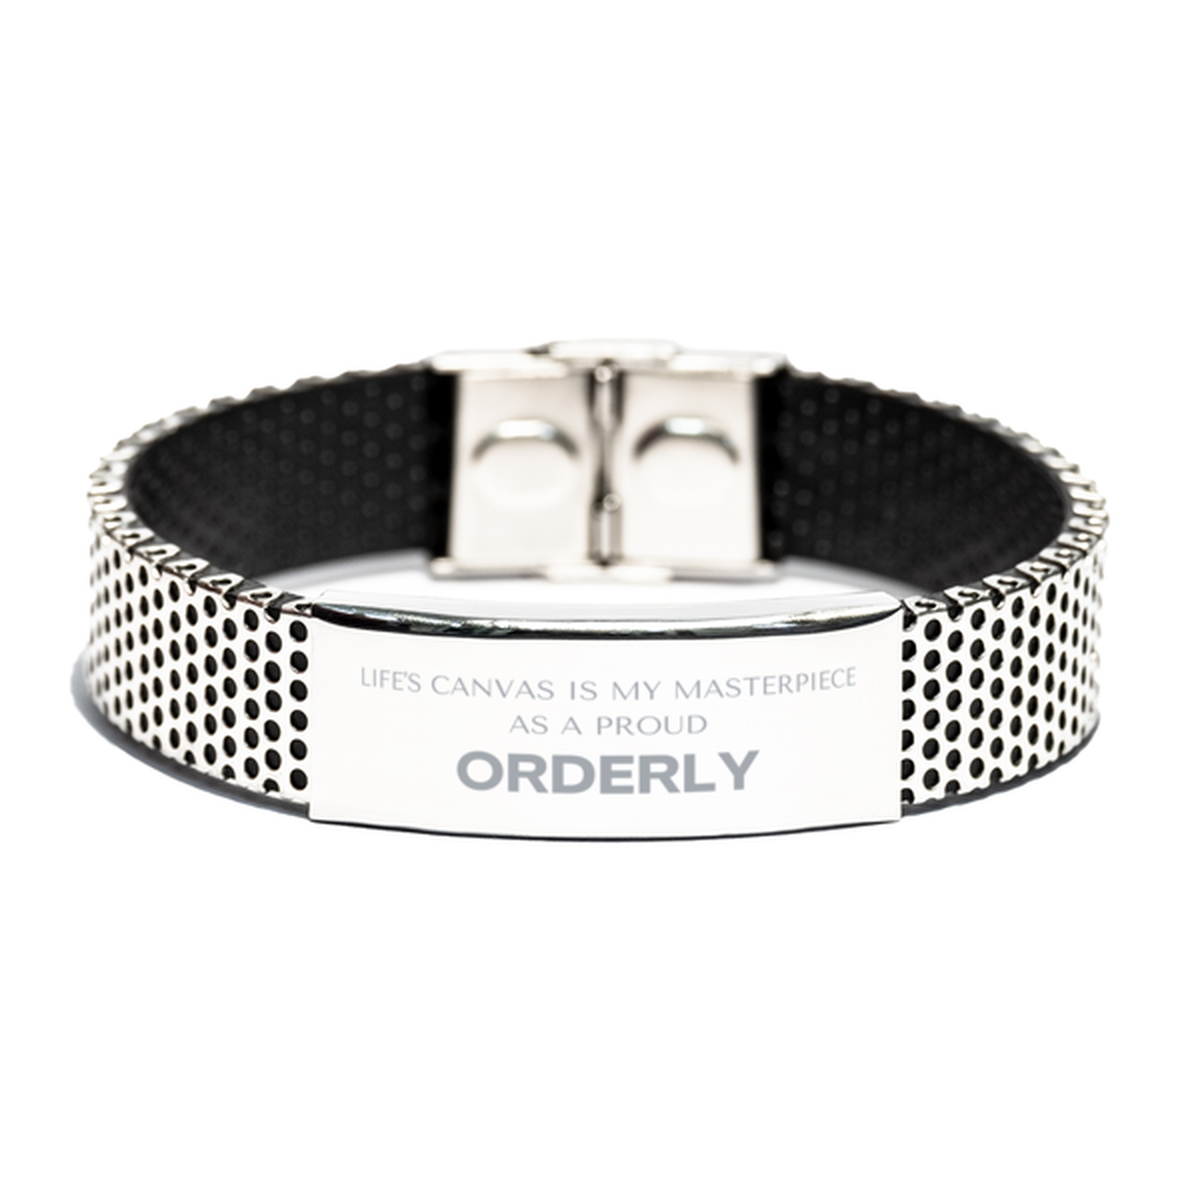 Proud Orderly Gifts, Life's canvas is my masterpiece, Epic Birthday Christmas Unique Stainless Steel Bracelet For Orderly, Coworkers, Men, Women, Friends